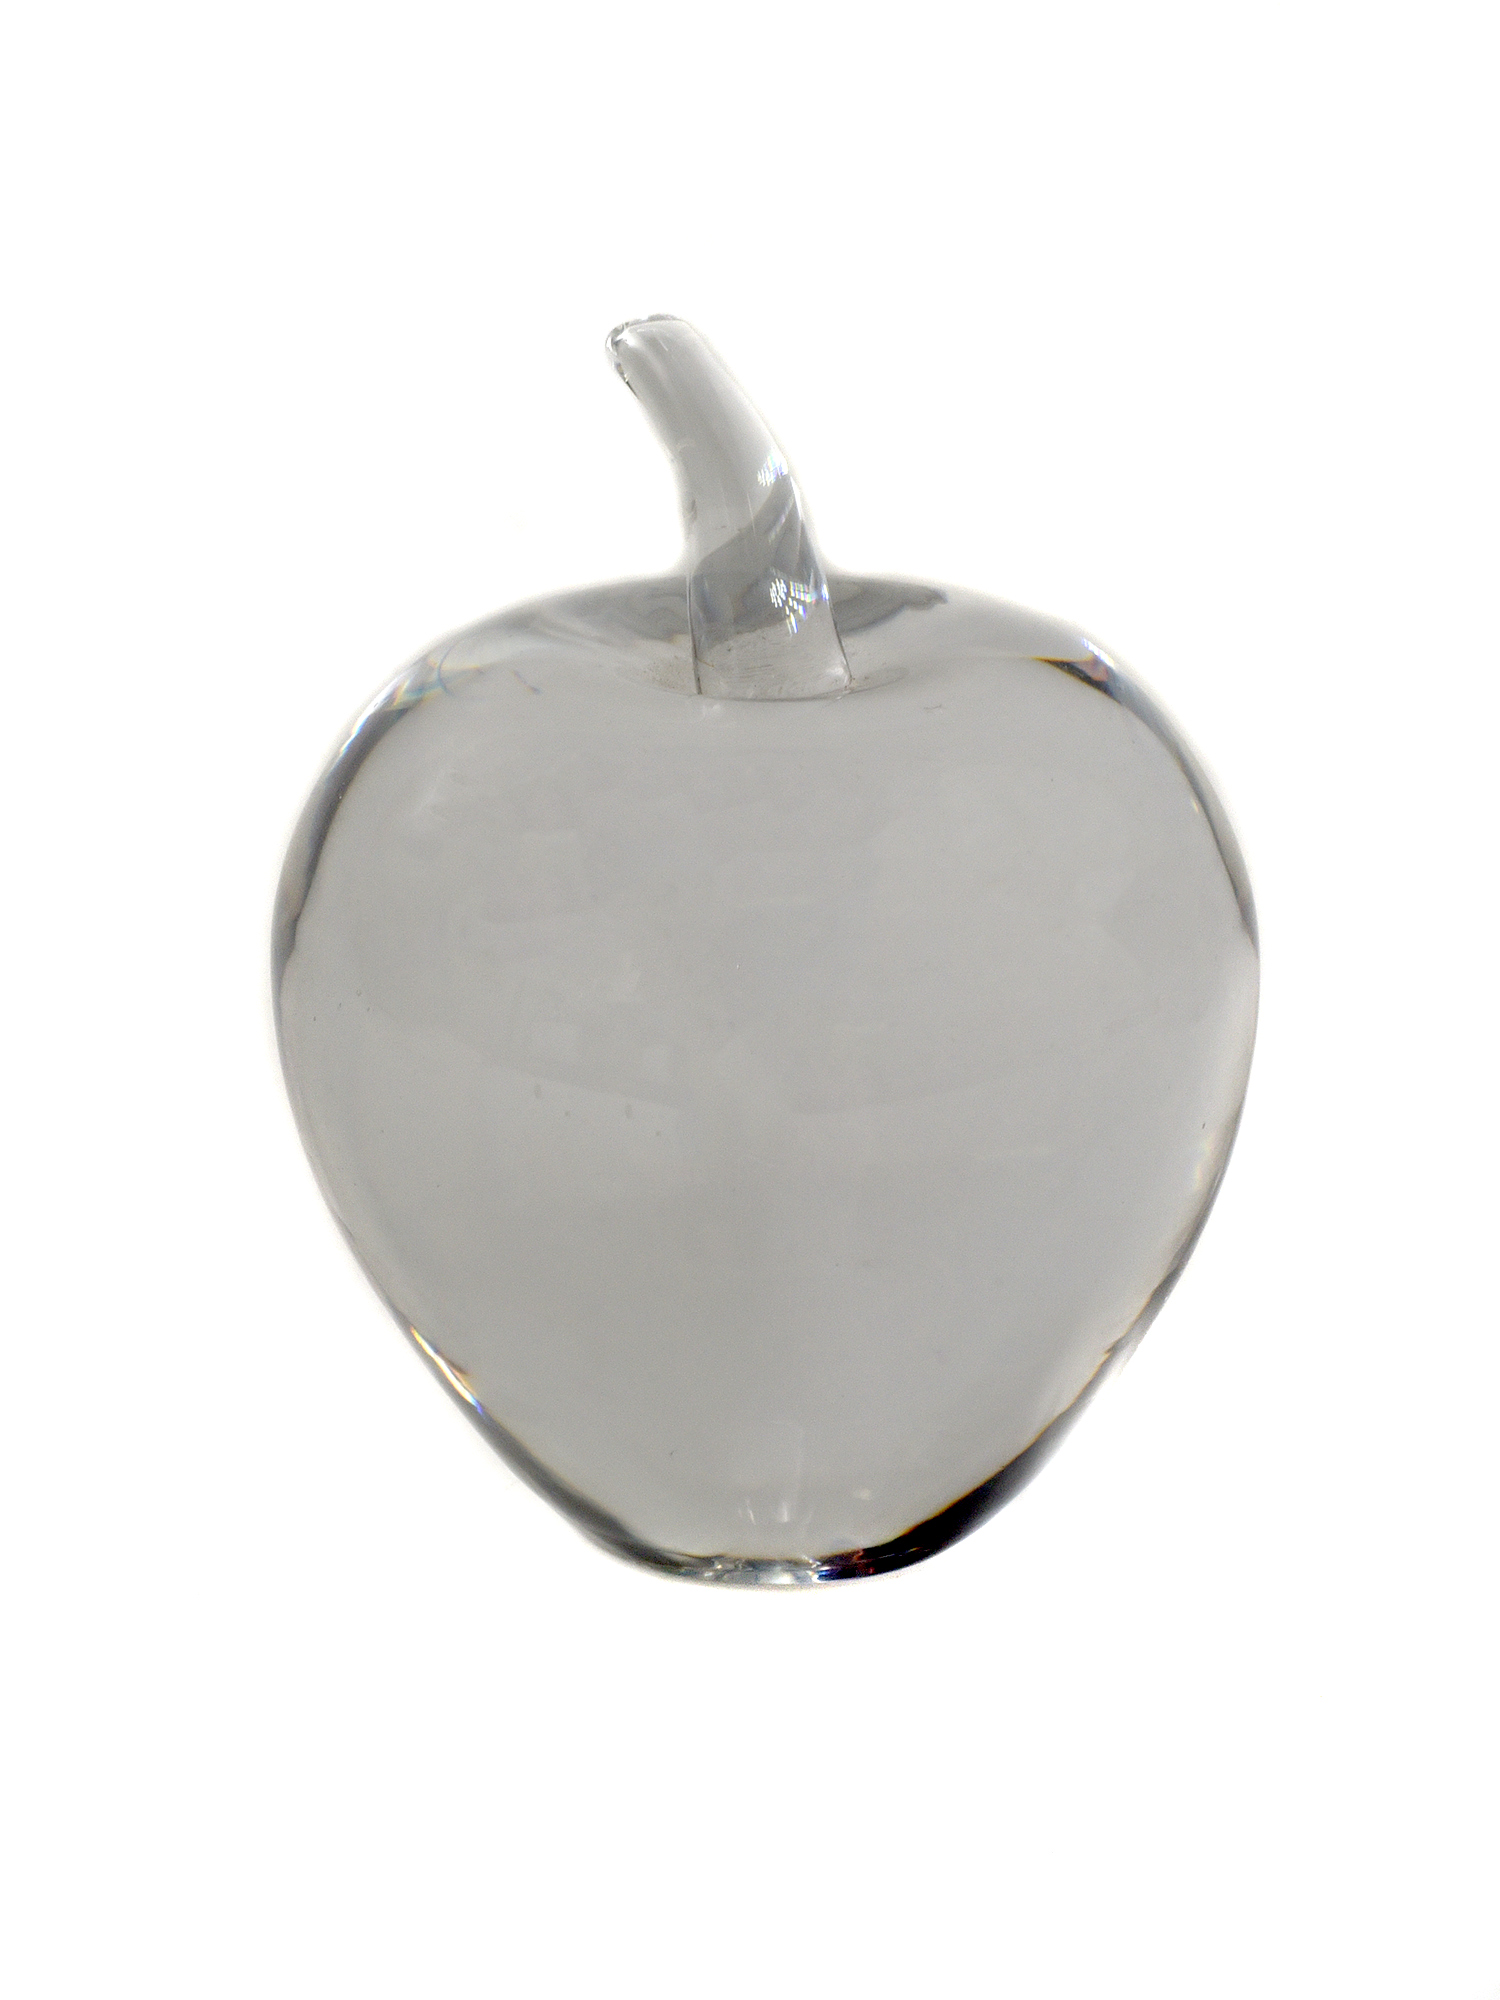 AN ANTIQUE CLEAR GLASS APPLE PAPERWEIGHT PIC-0